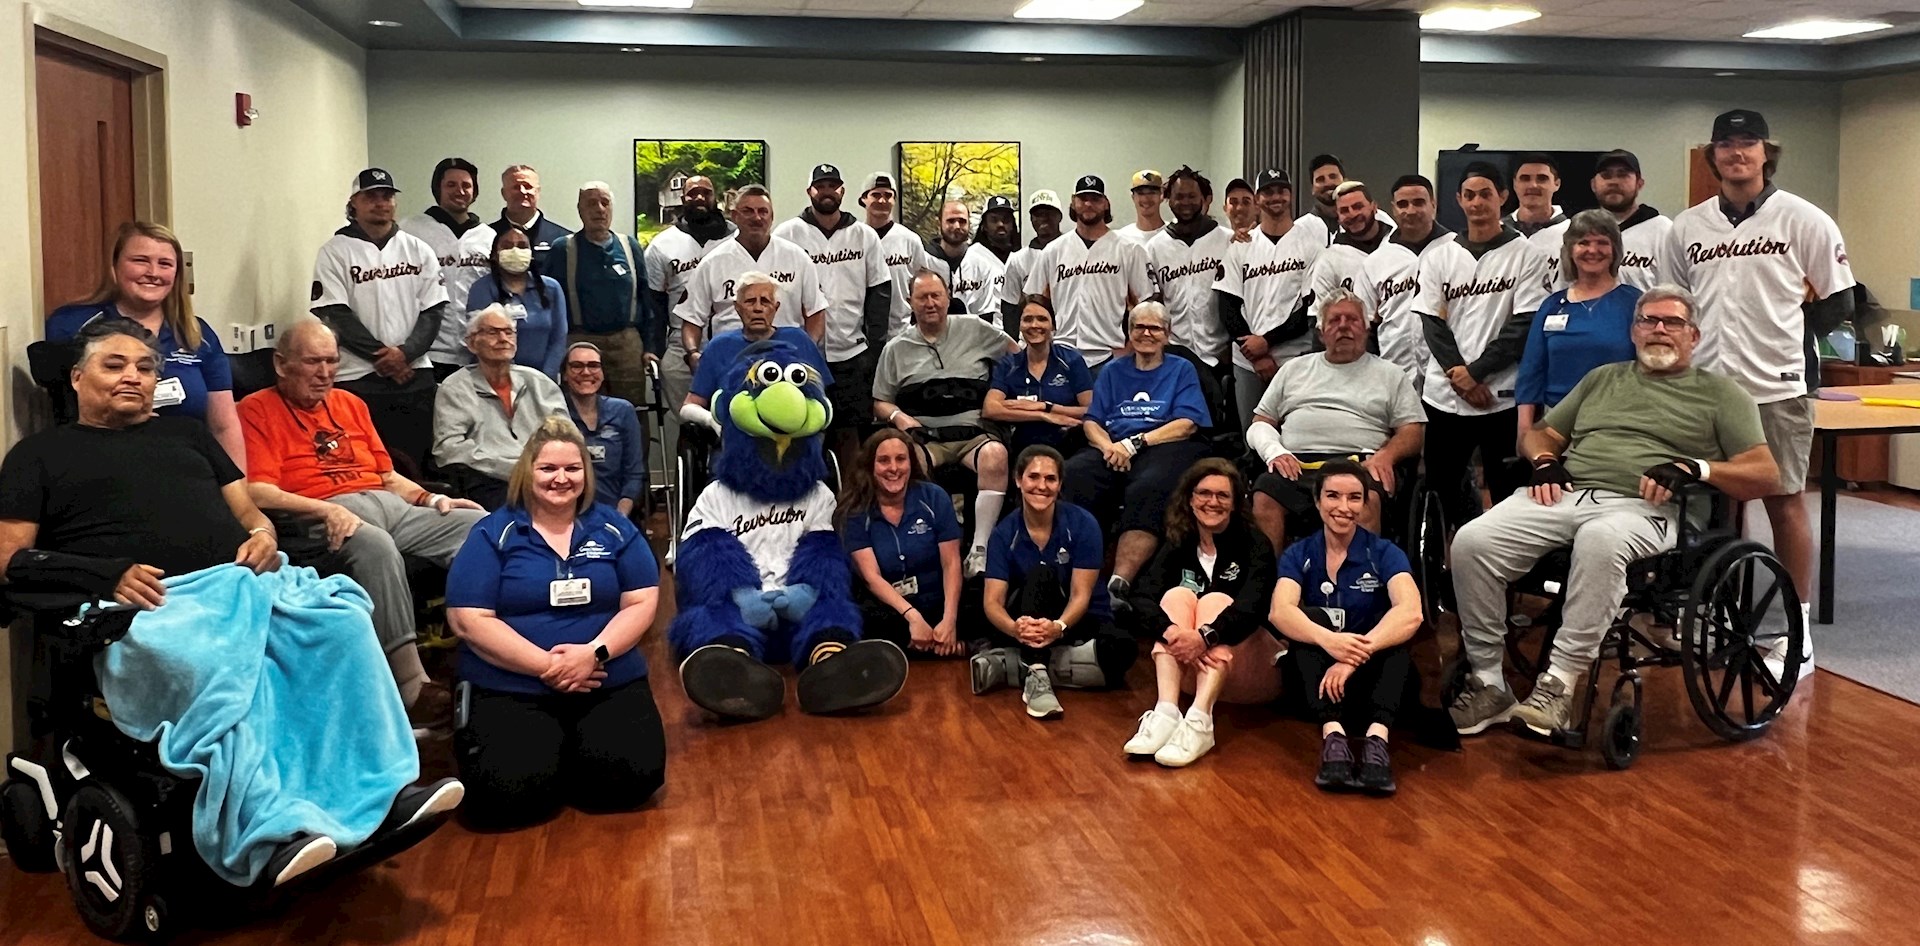 York Revolution team members and their team mascot visited with WellSpan patients and team members at WellSpan Surgery & Rehabilitation Hospital.